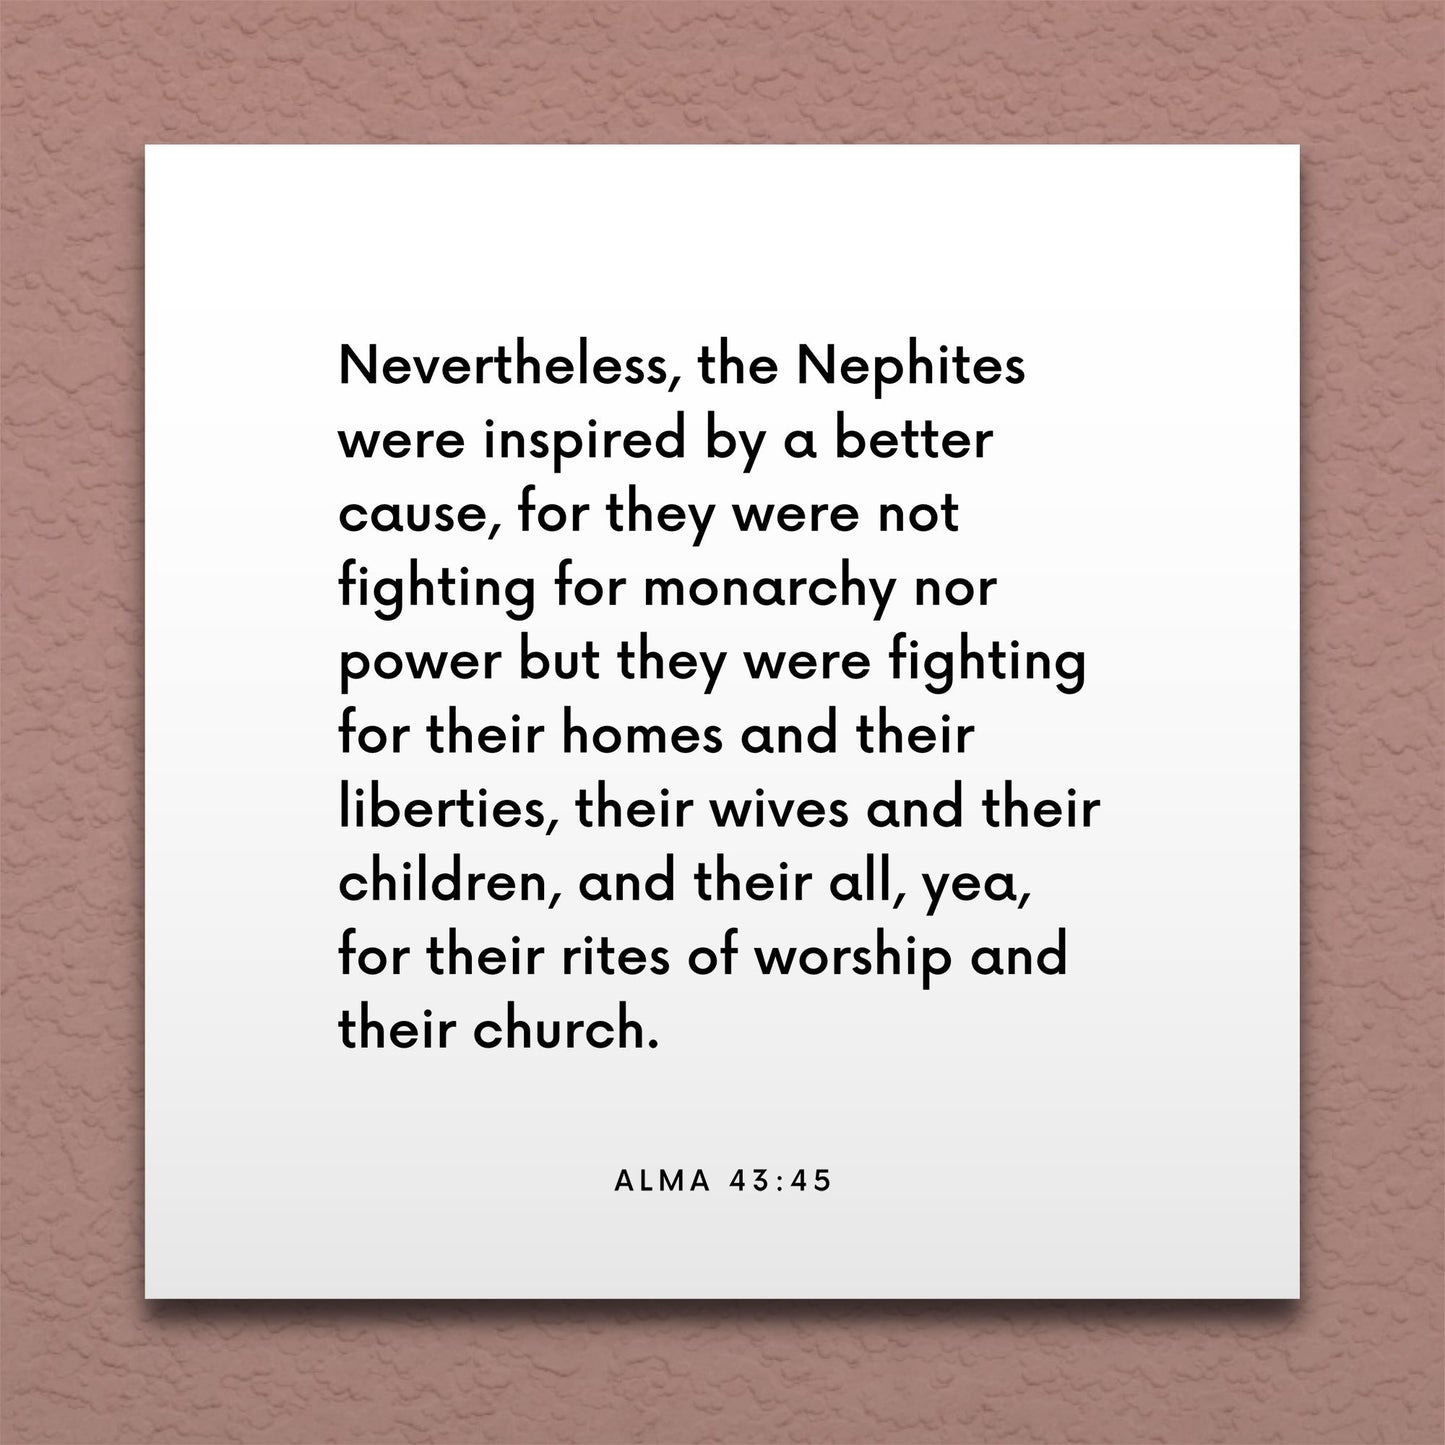 Wall-mounted scripture tile for Alma 43:45 - "The Nephites were inspired by a better cause"